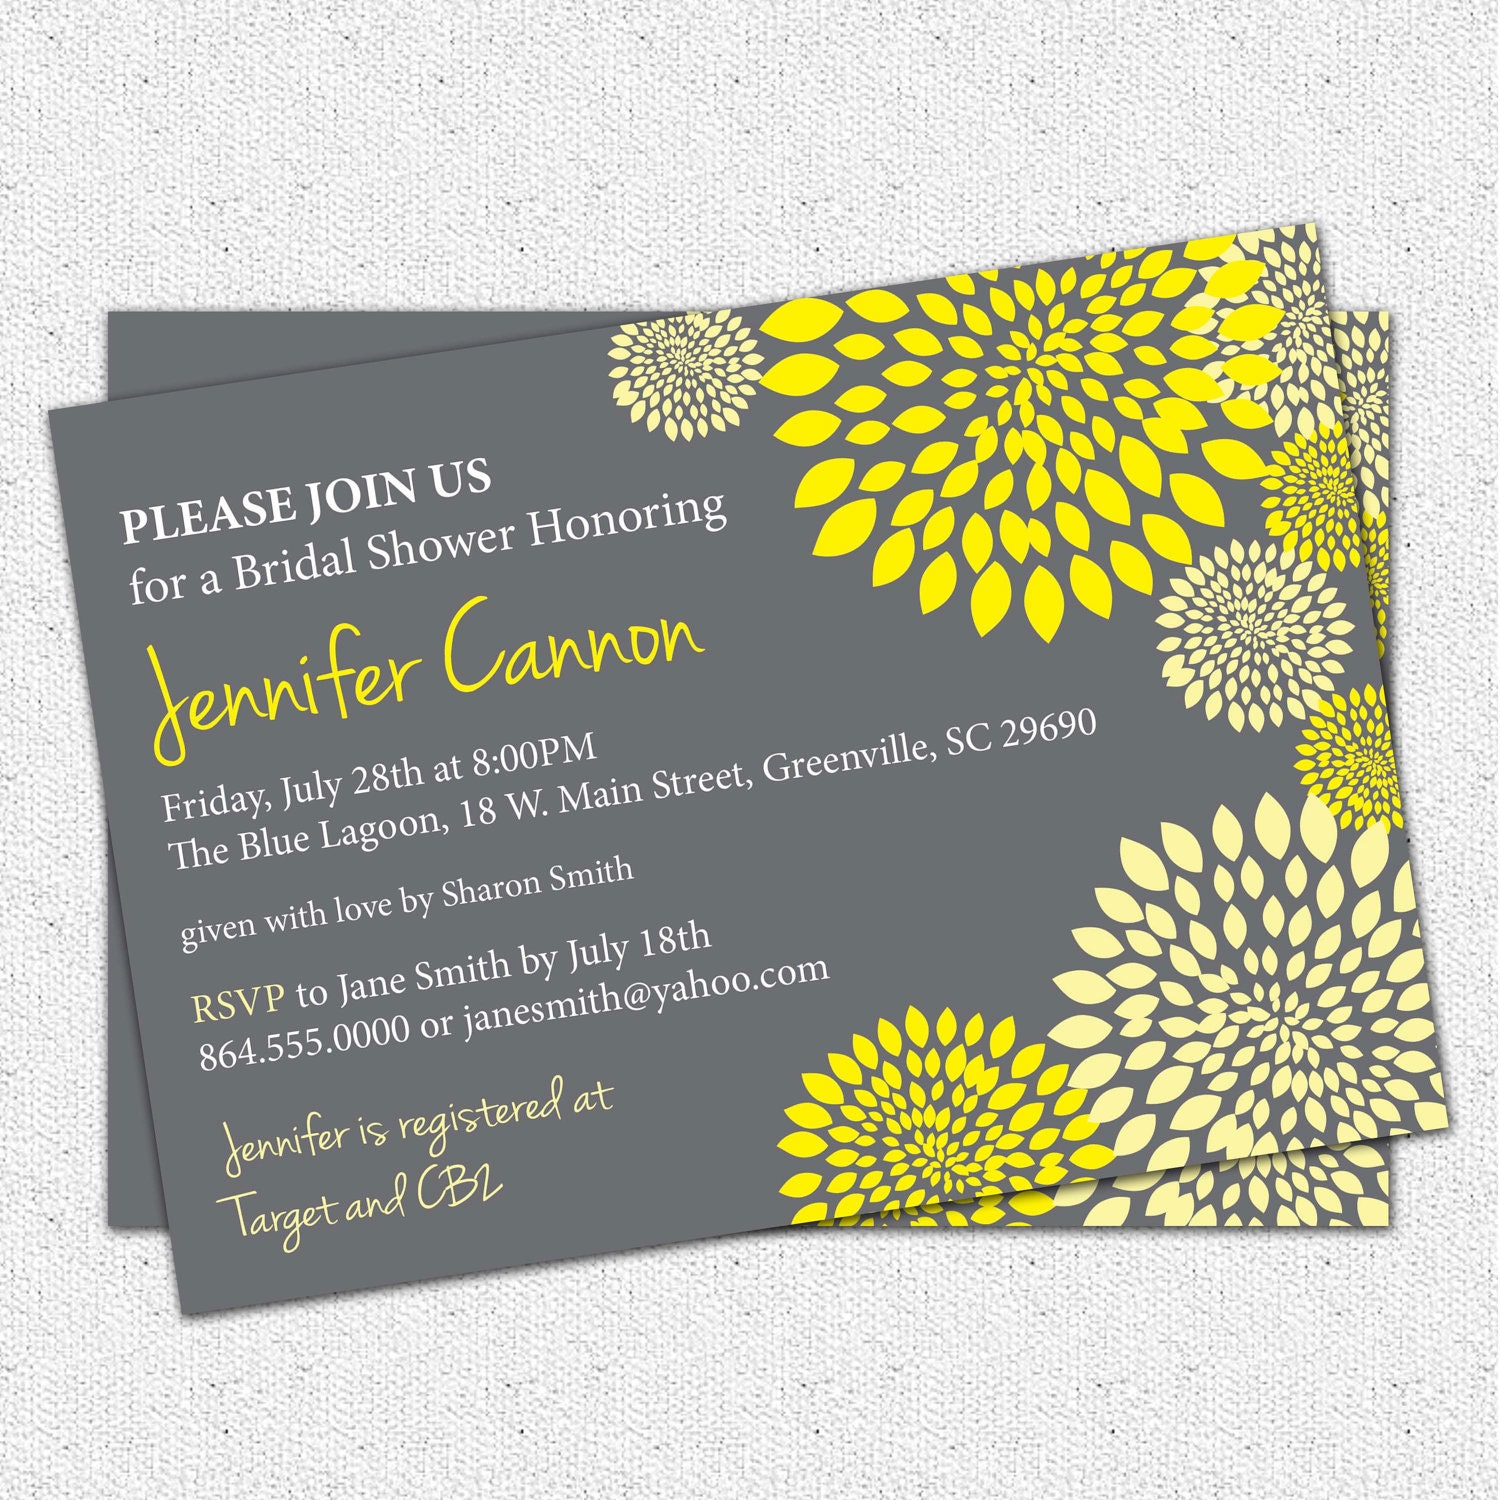 Bridal shower invitations yellow and gray